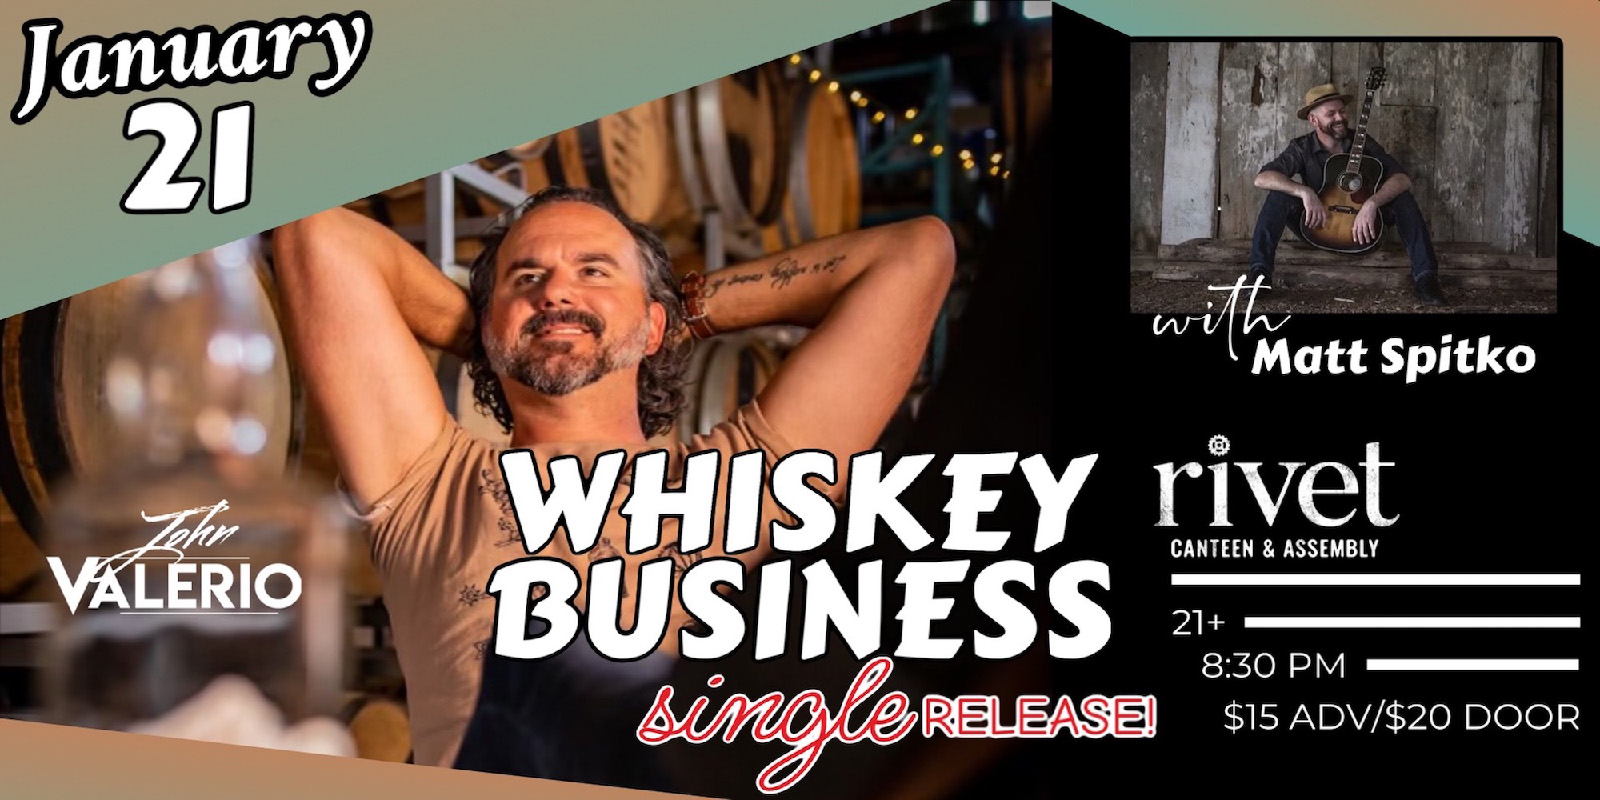 Celebrate the release of John Valerio's new soon to be smash hit 'Whiskey Business' + special guest, Matt Spitko!